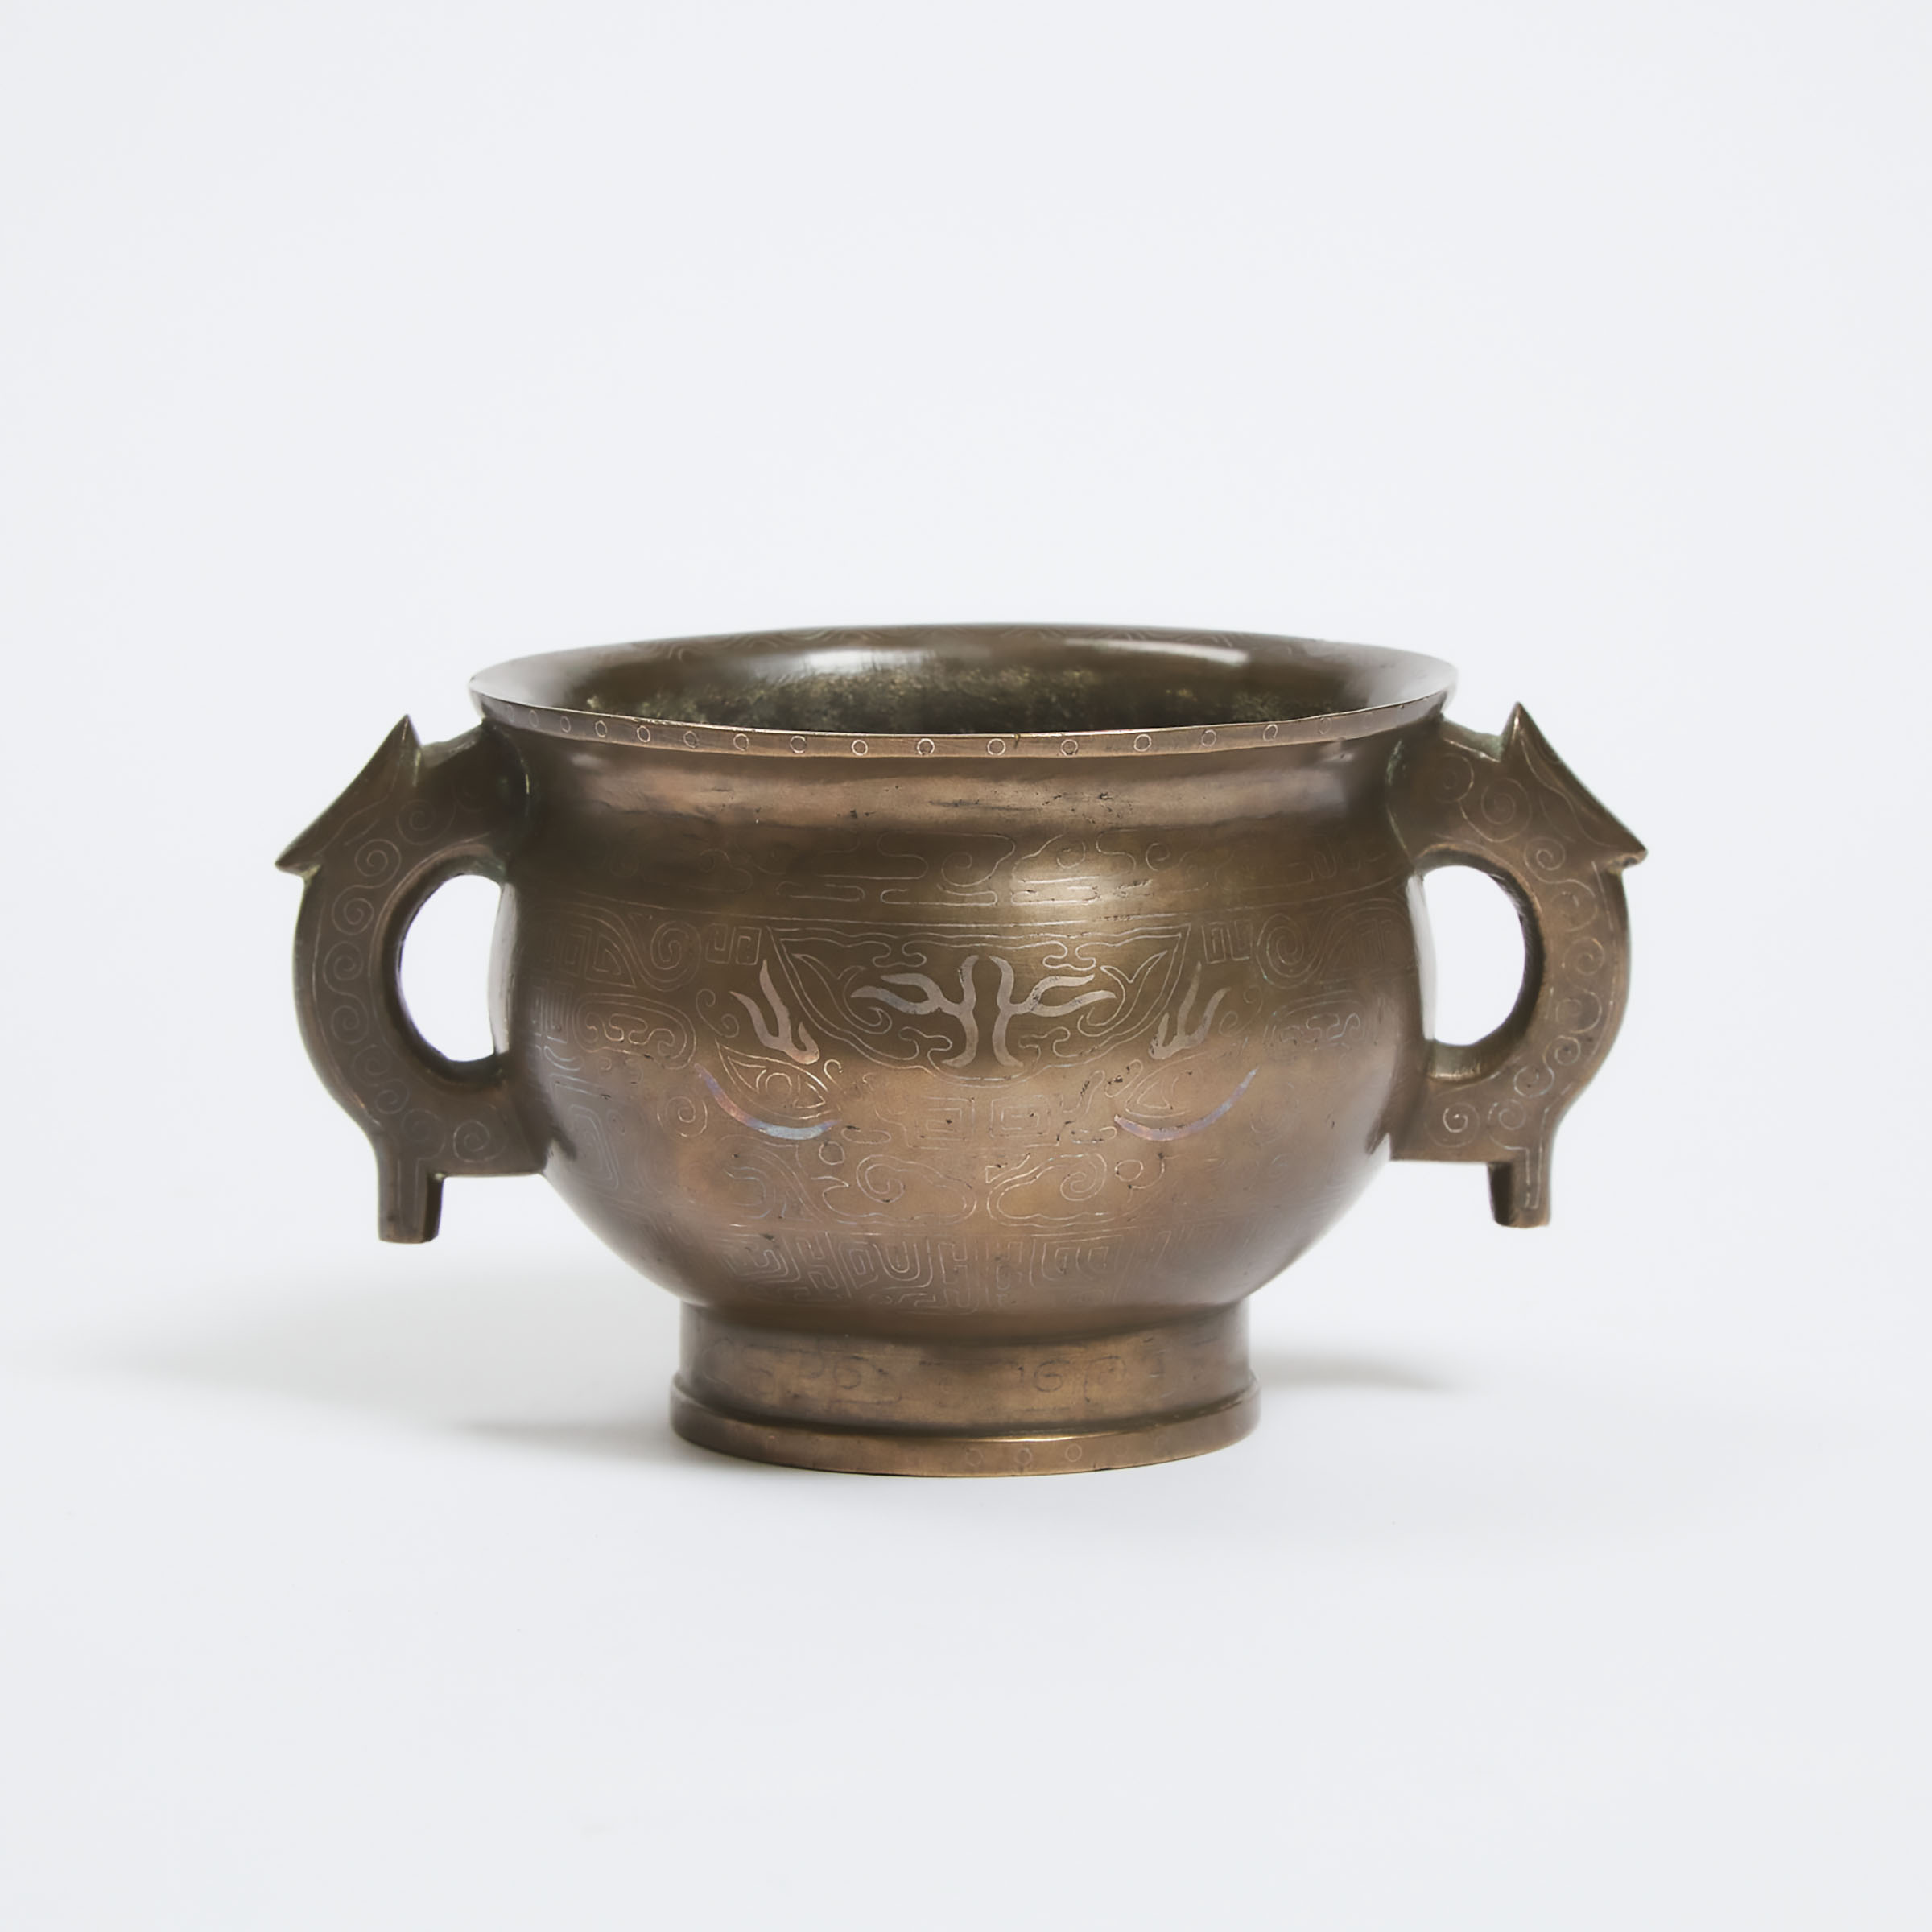 A Silver-Inlaid Bronze Gui-Form Censer, Shisou Mark, Ming/Qing Dynasty, 17th/18th Century